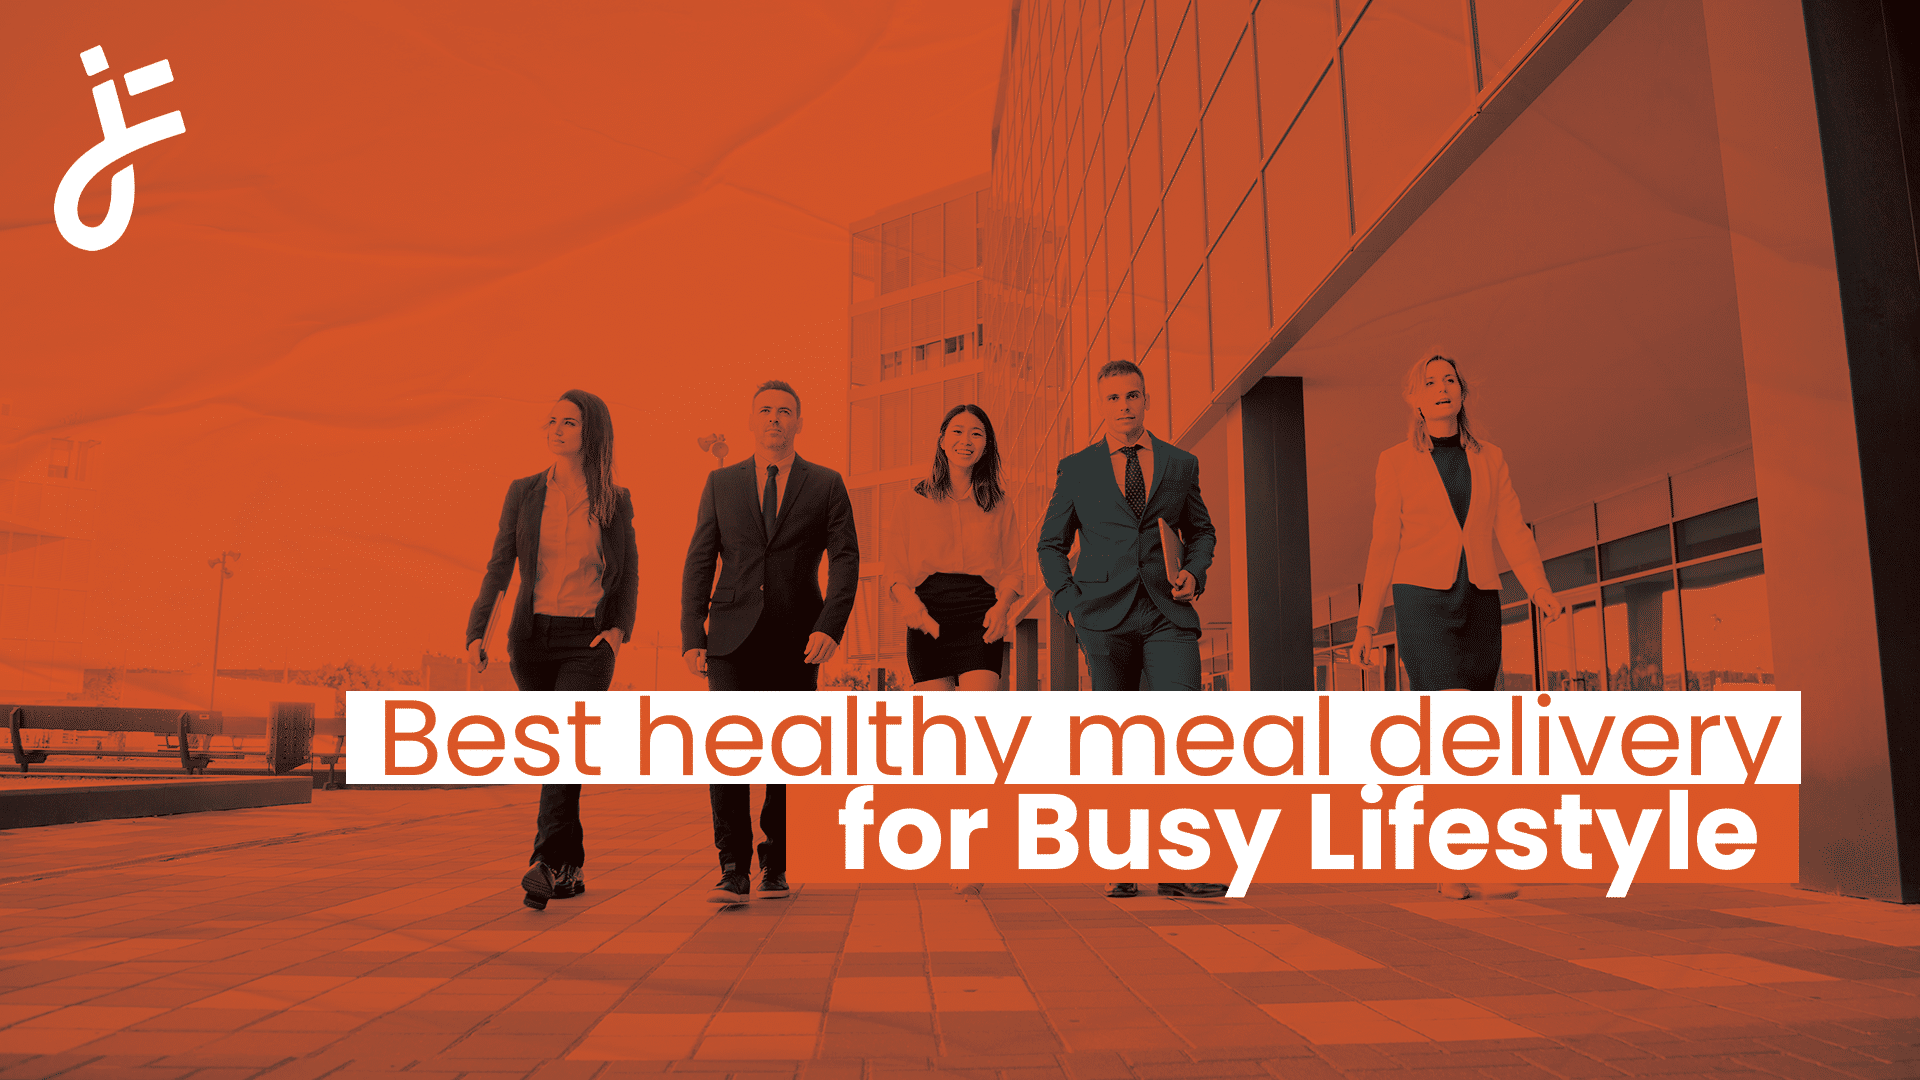 Best healthy meal delivery for busy lifestyle